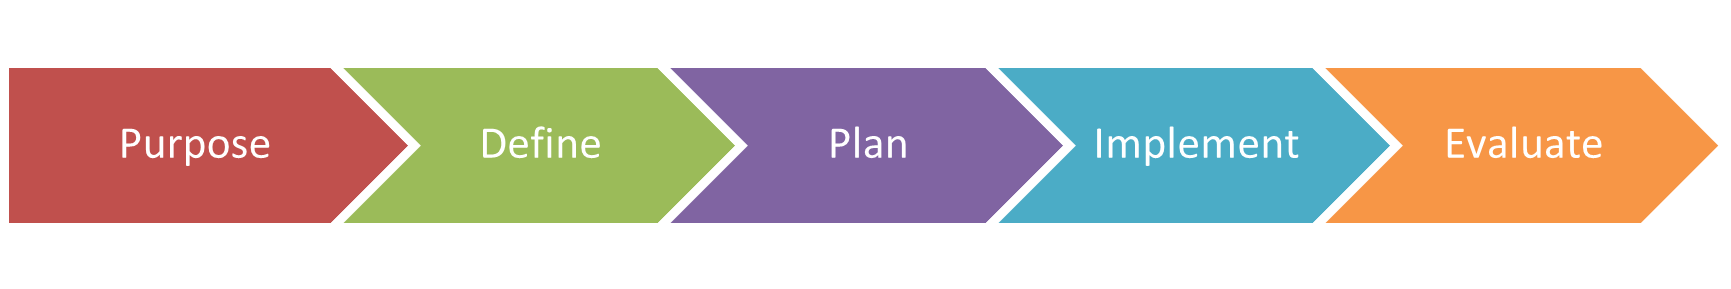 Arrows with text purpose, define, plan, implement and evaluate 